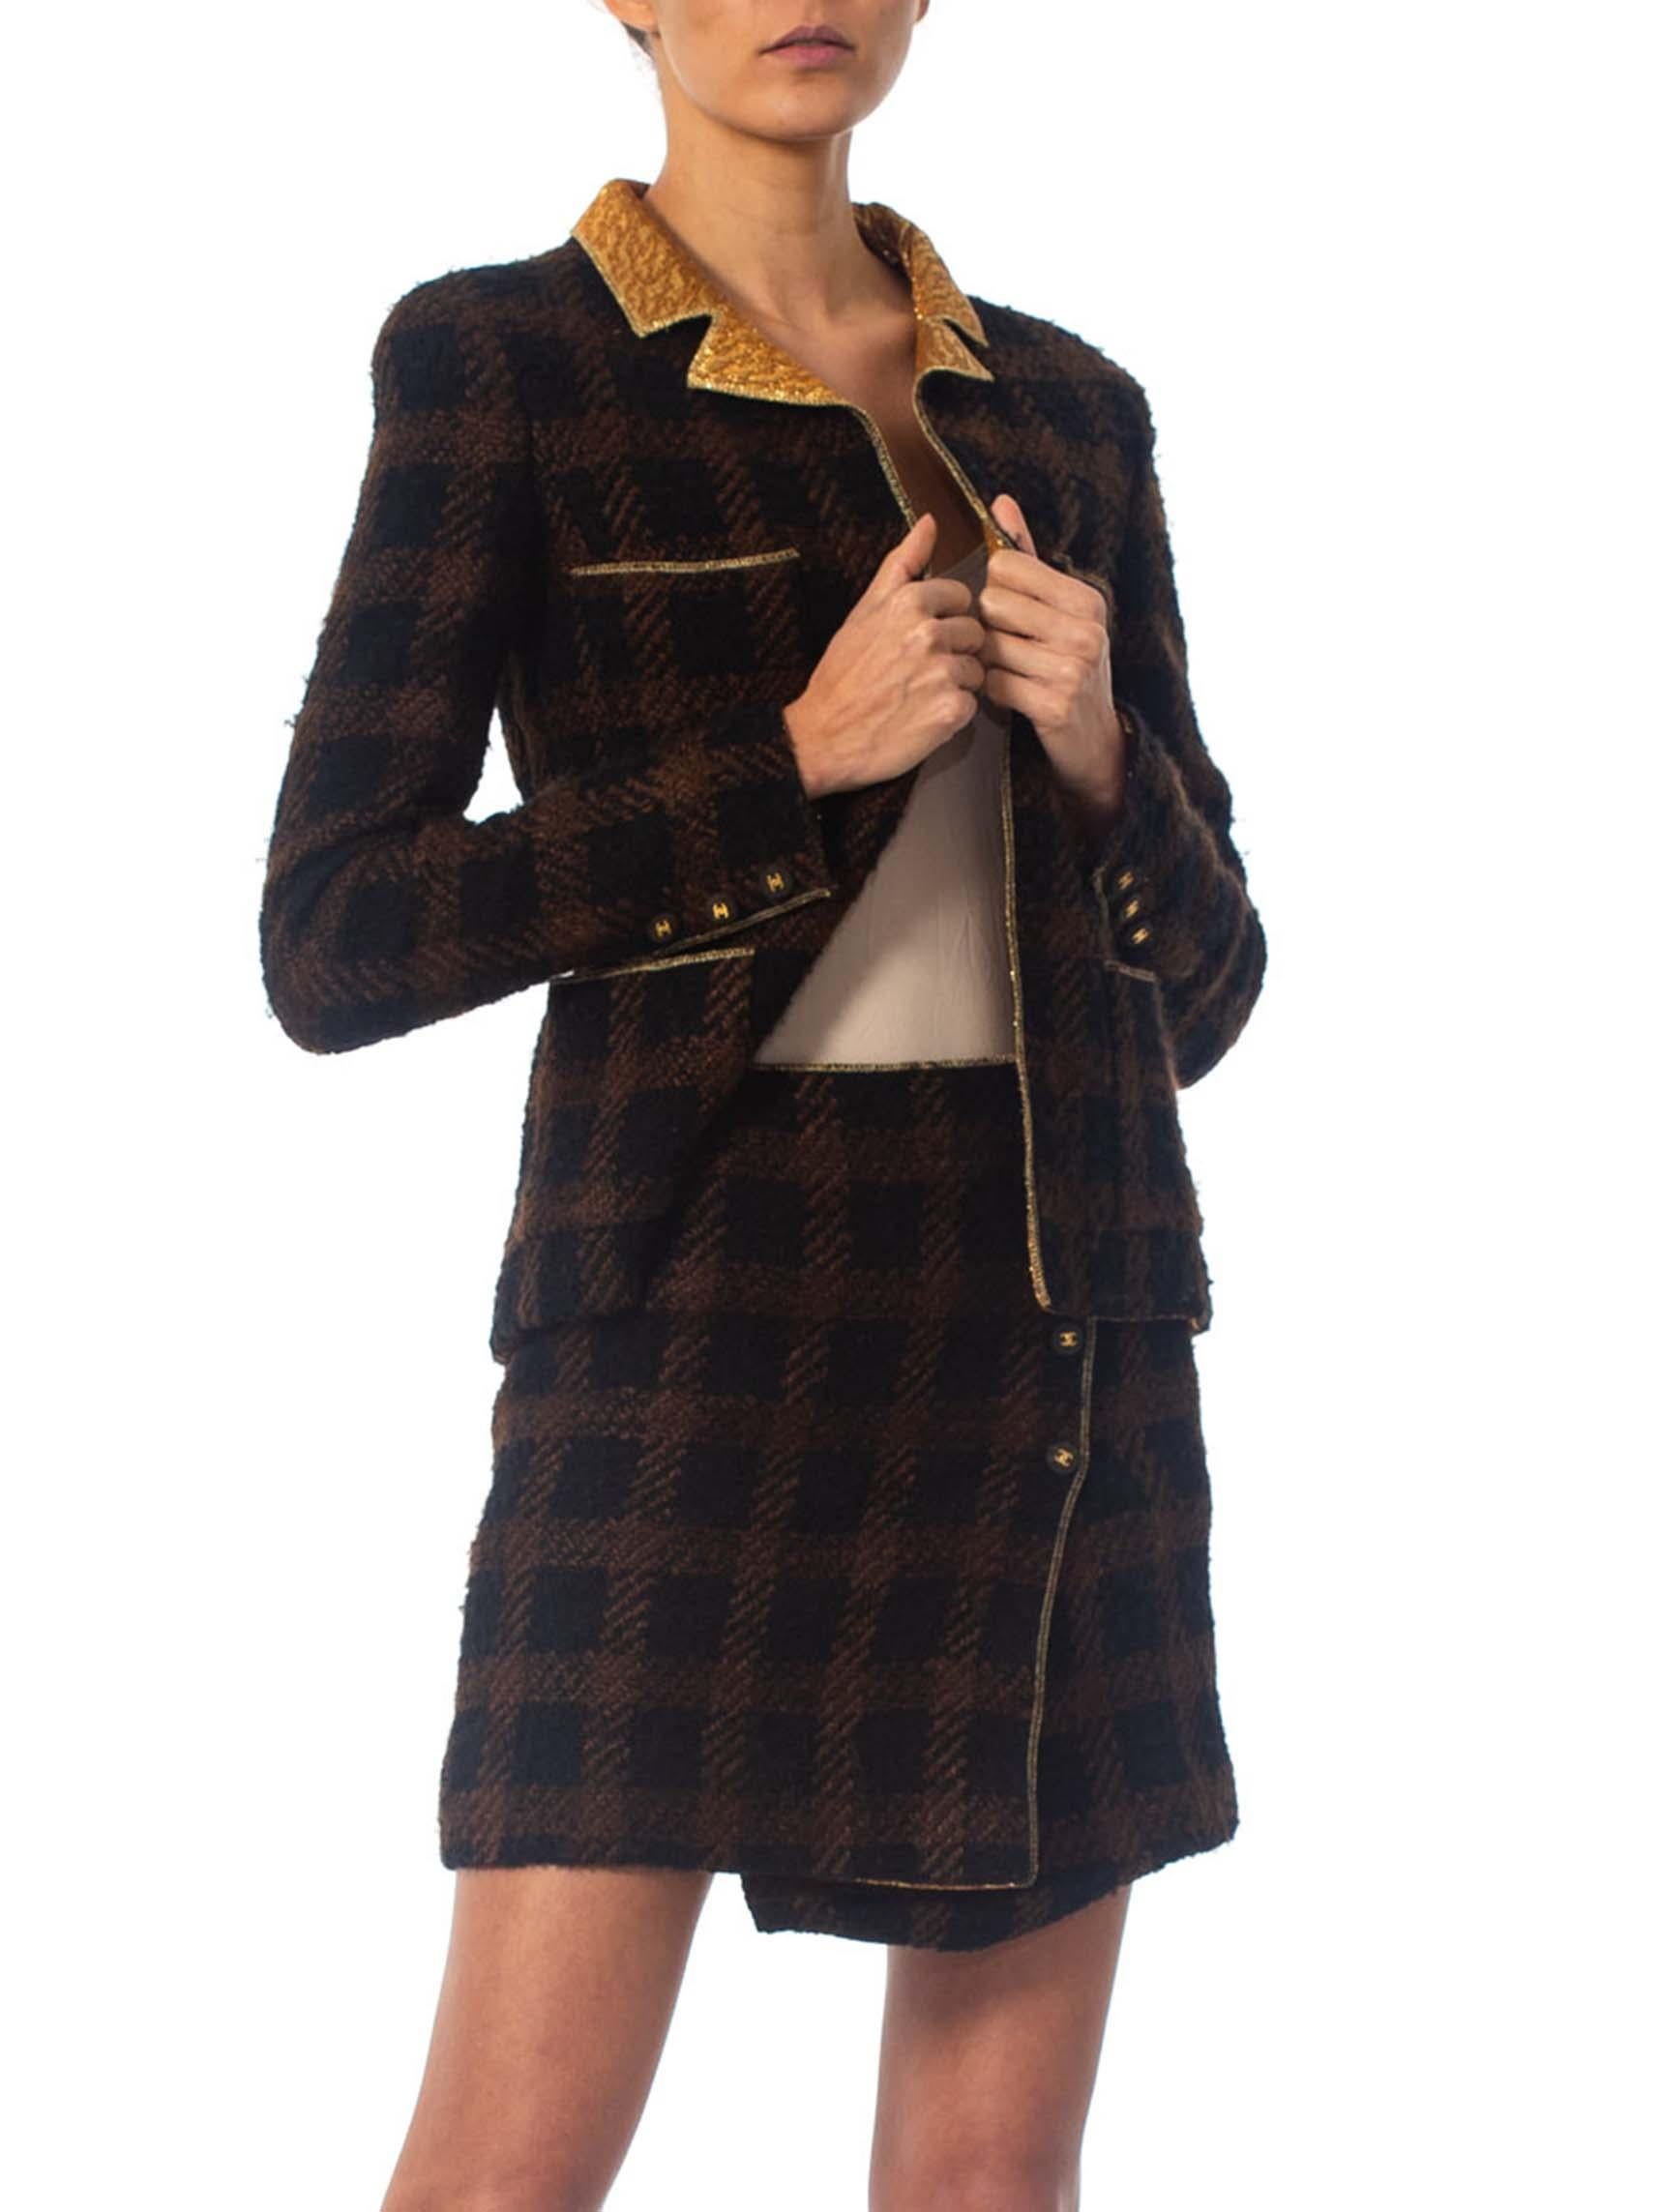 1990S CHANEL Black & Brown With  Gold Lamé Wool Mini Skirt Suit Lined In Silk For Sale 4